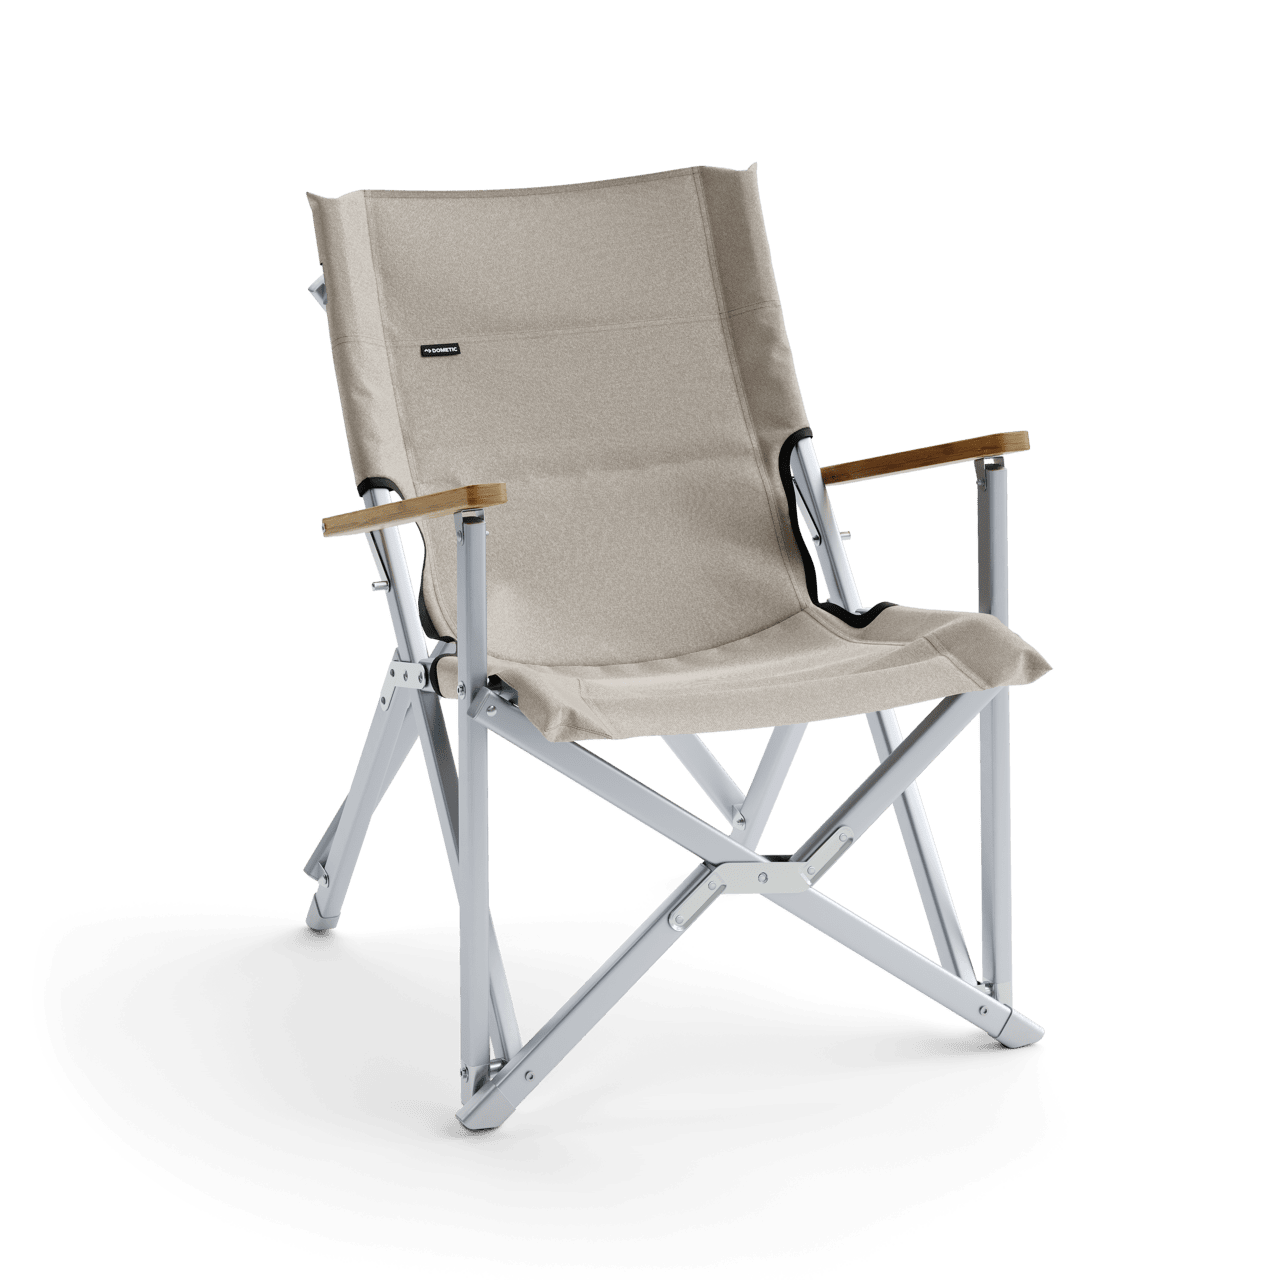 Dometic Go Compact Camp Chair